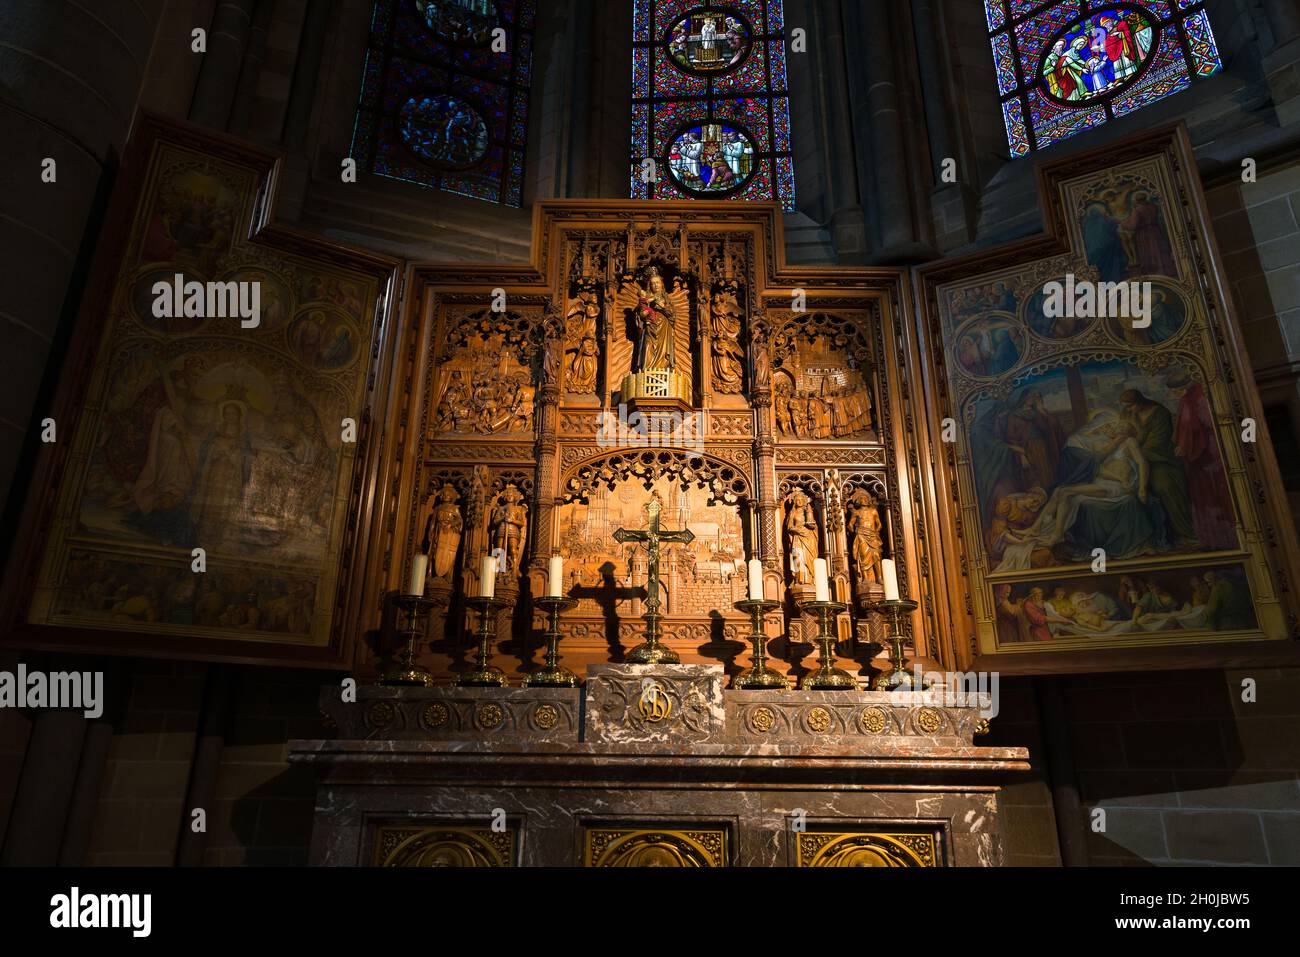 Details of altar piece in Ypres St. Martin's Cathedral, after WWI restored to its medieval beauty. Stock Photo